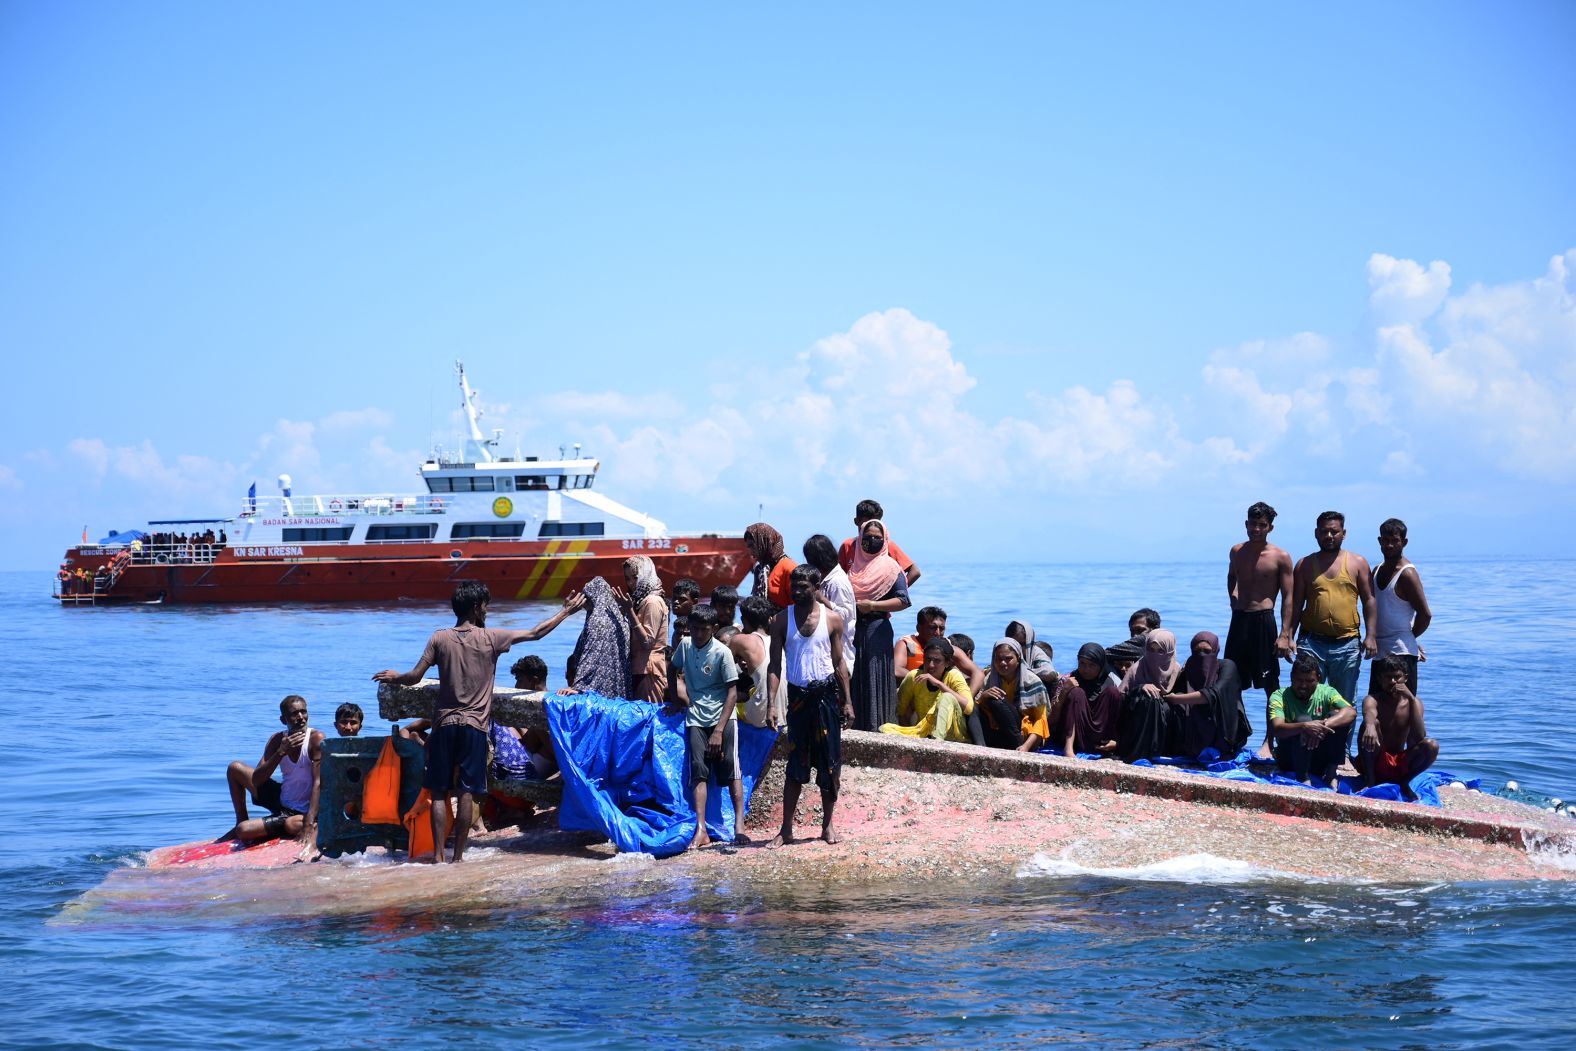 Rohingya refugees wait to be rescued from the hull of their capsized boat as a rescue vessel approaches off West Aceh, Indonesia, on Thursday, March 21.